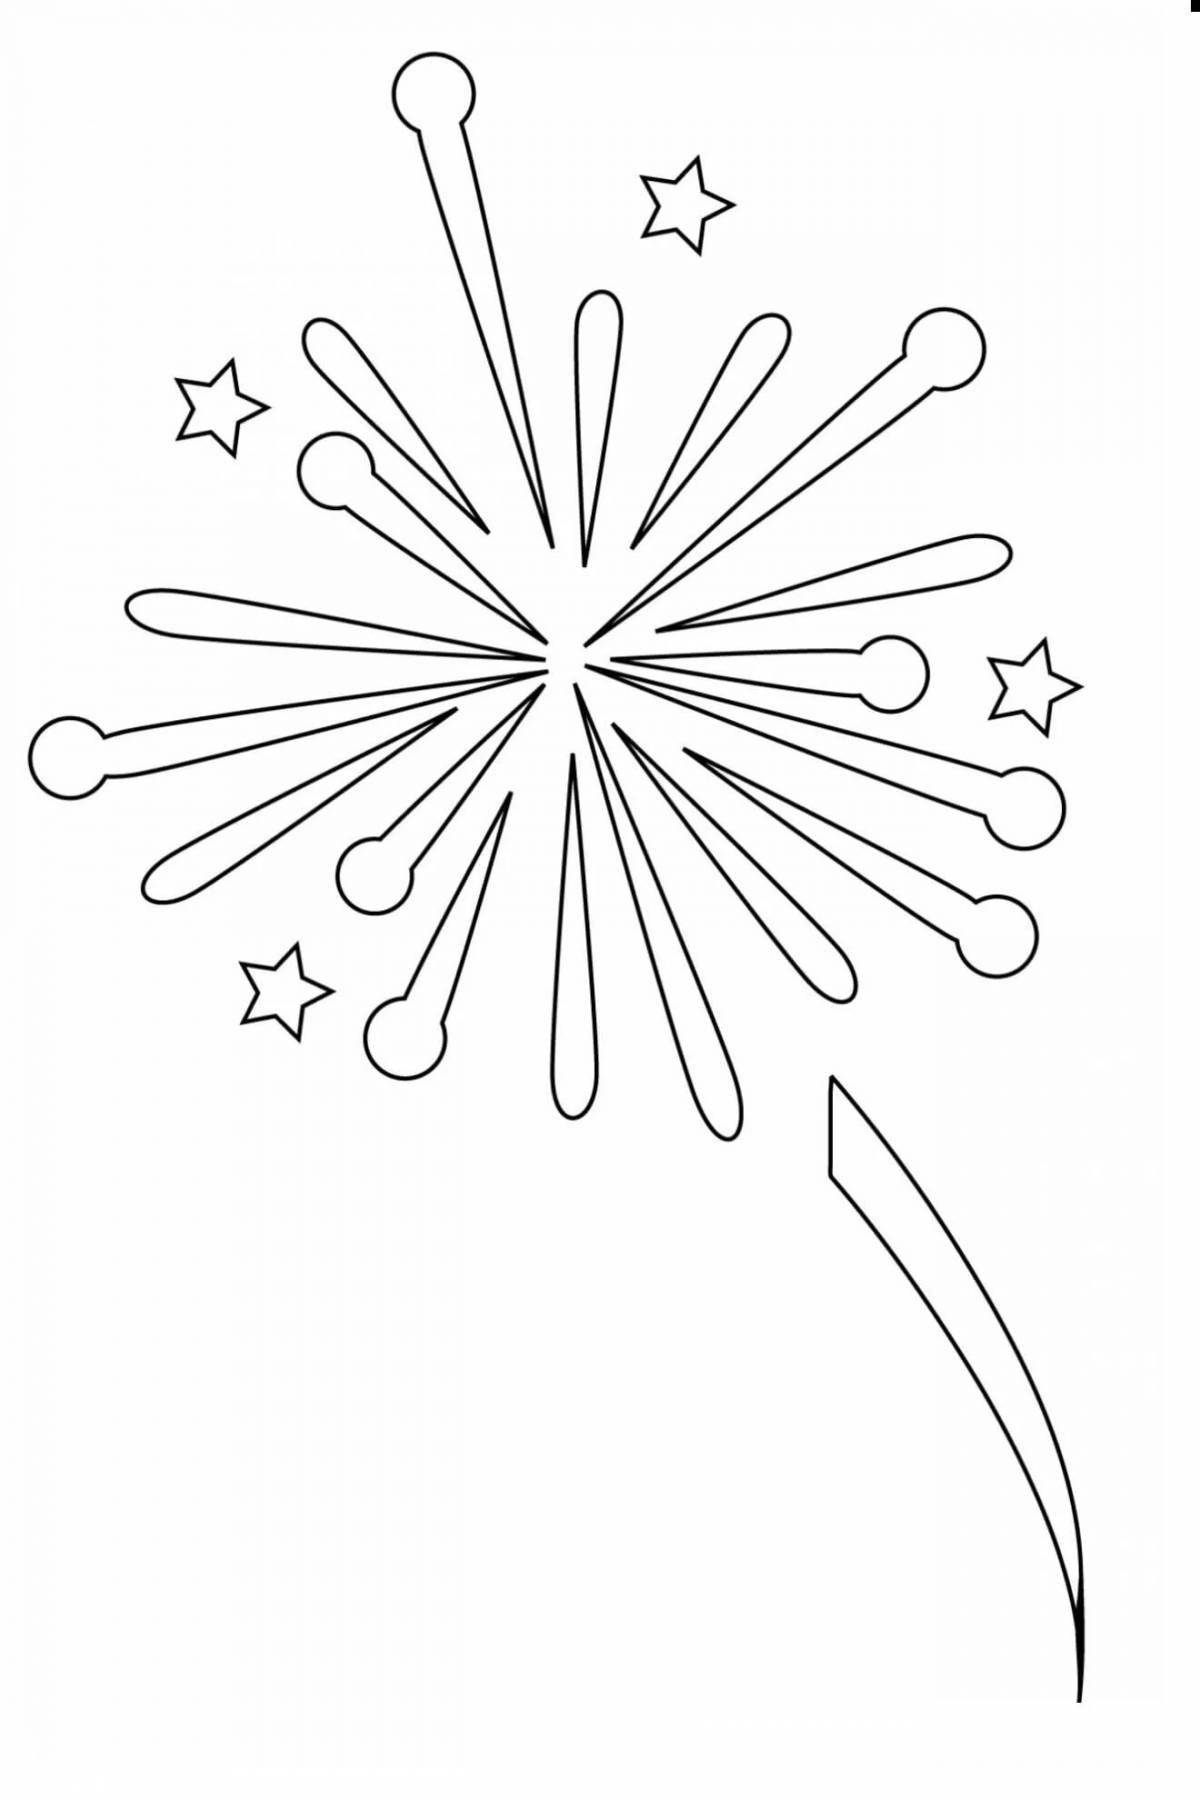 Amazing fireworks coloring page